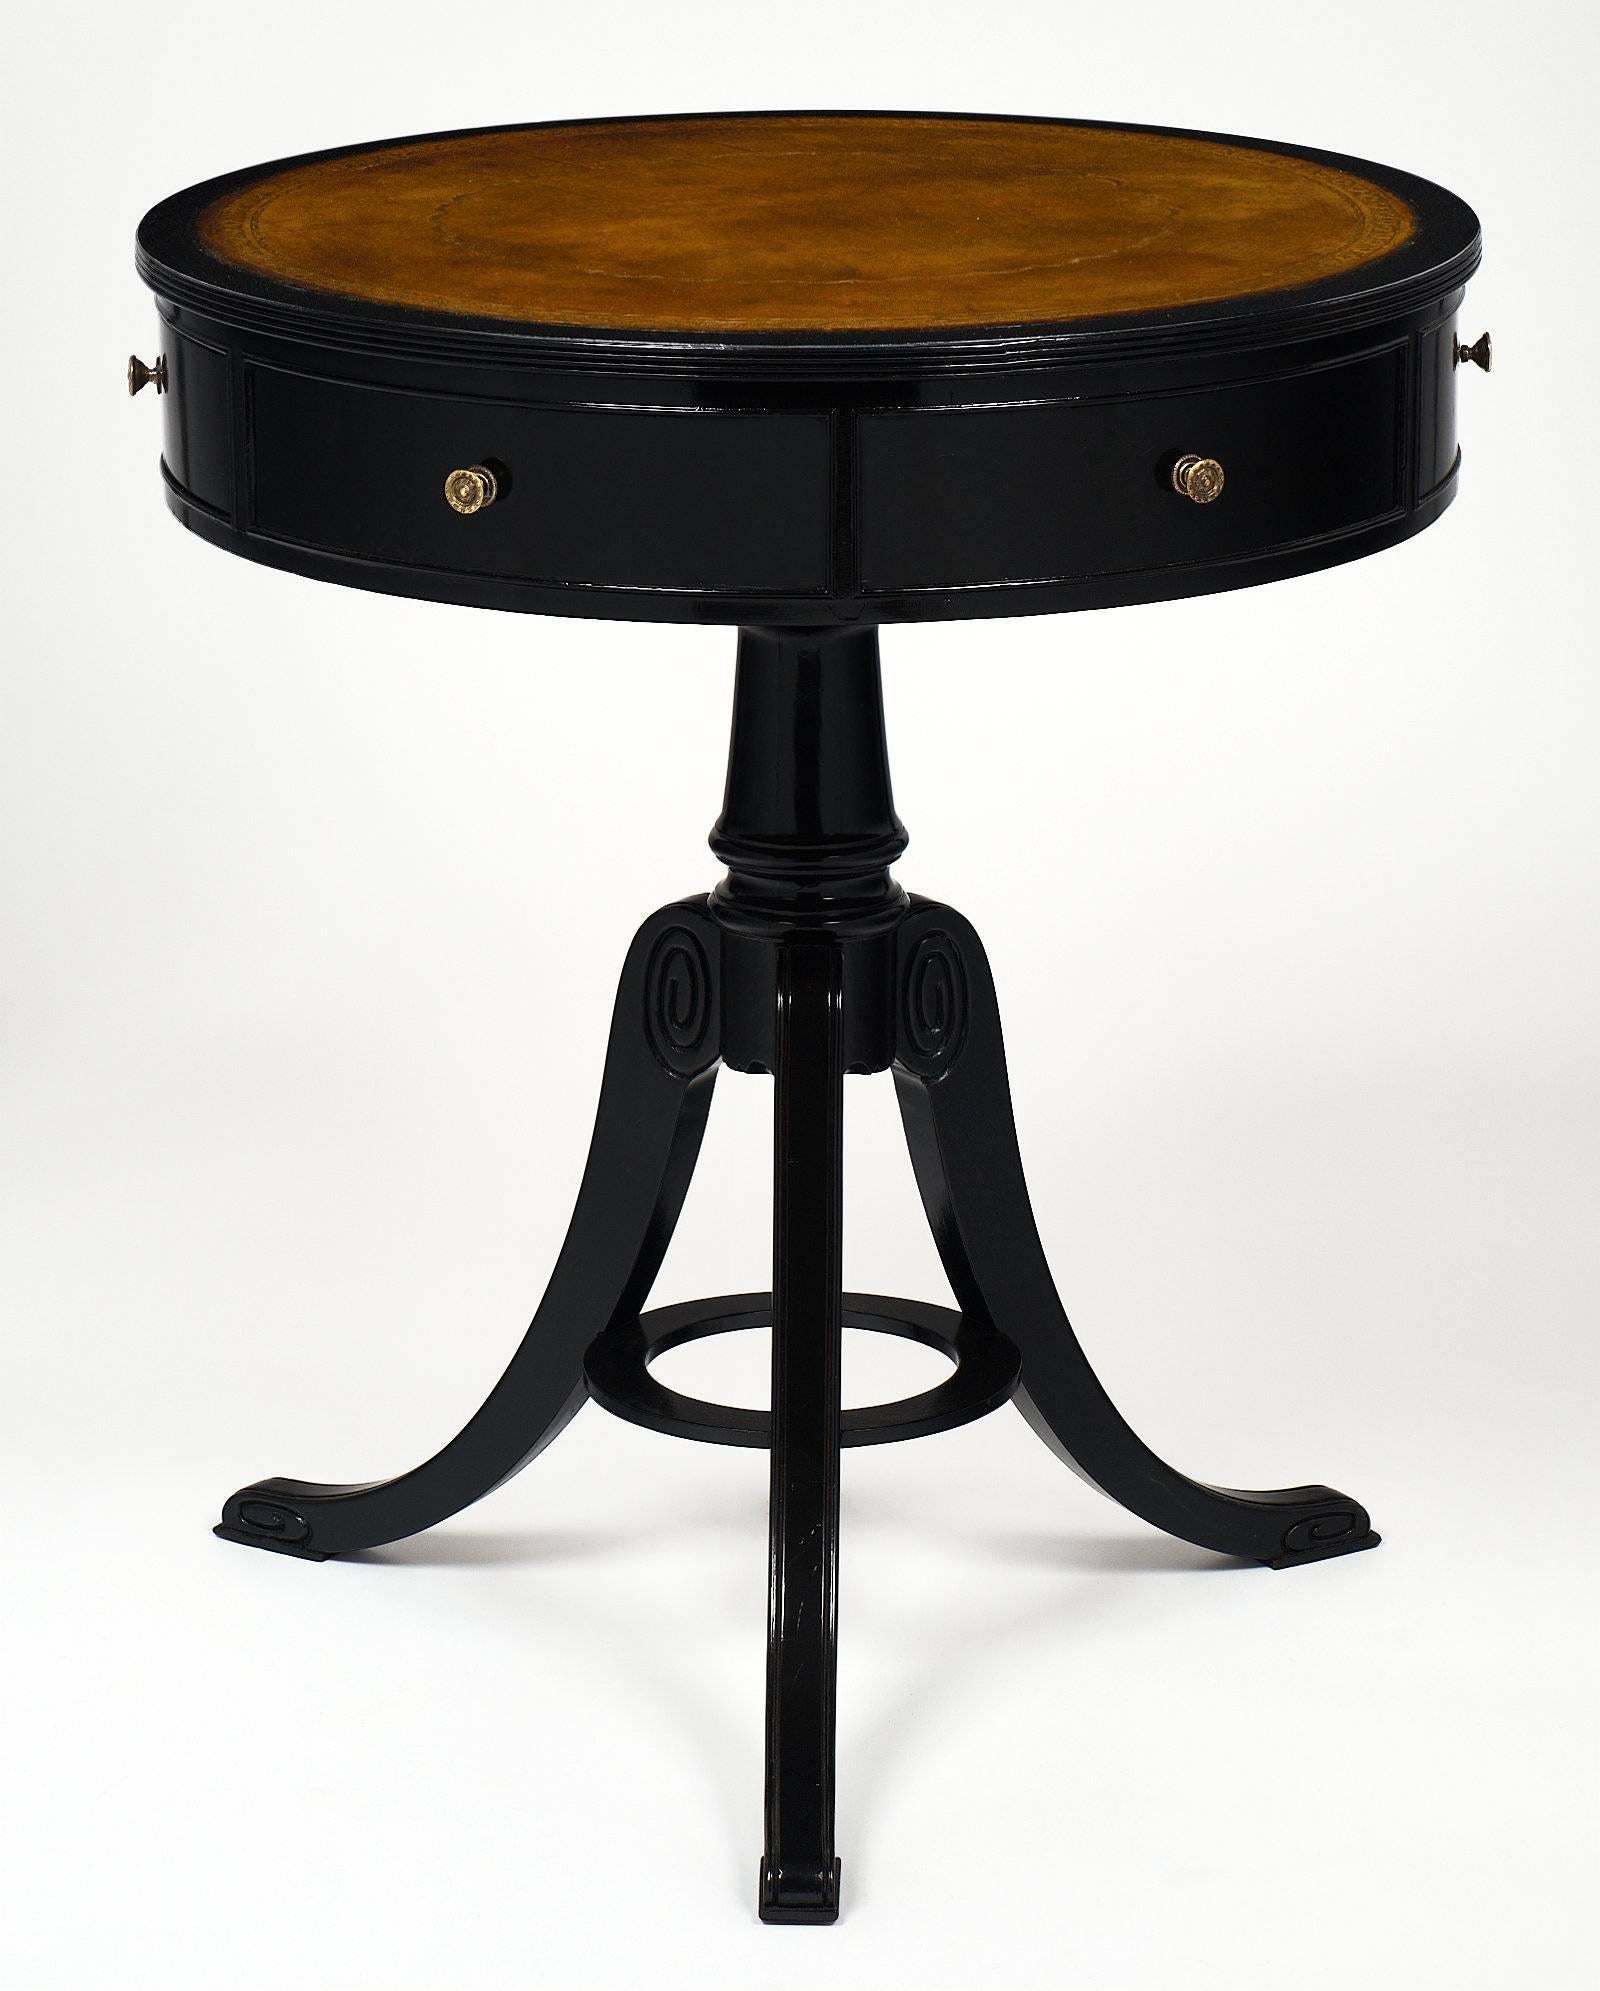 English Victorian style “gueridon” with gilt embossed leather top. The table has two drawers and four faux drawers. There is a circular stretcher between the three curved legs. The table is made of mahogany that has been ebonized and finished with a